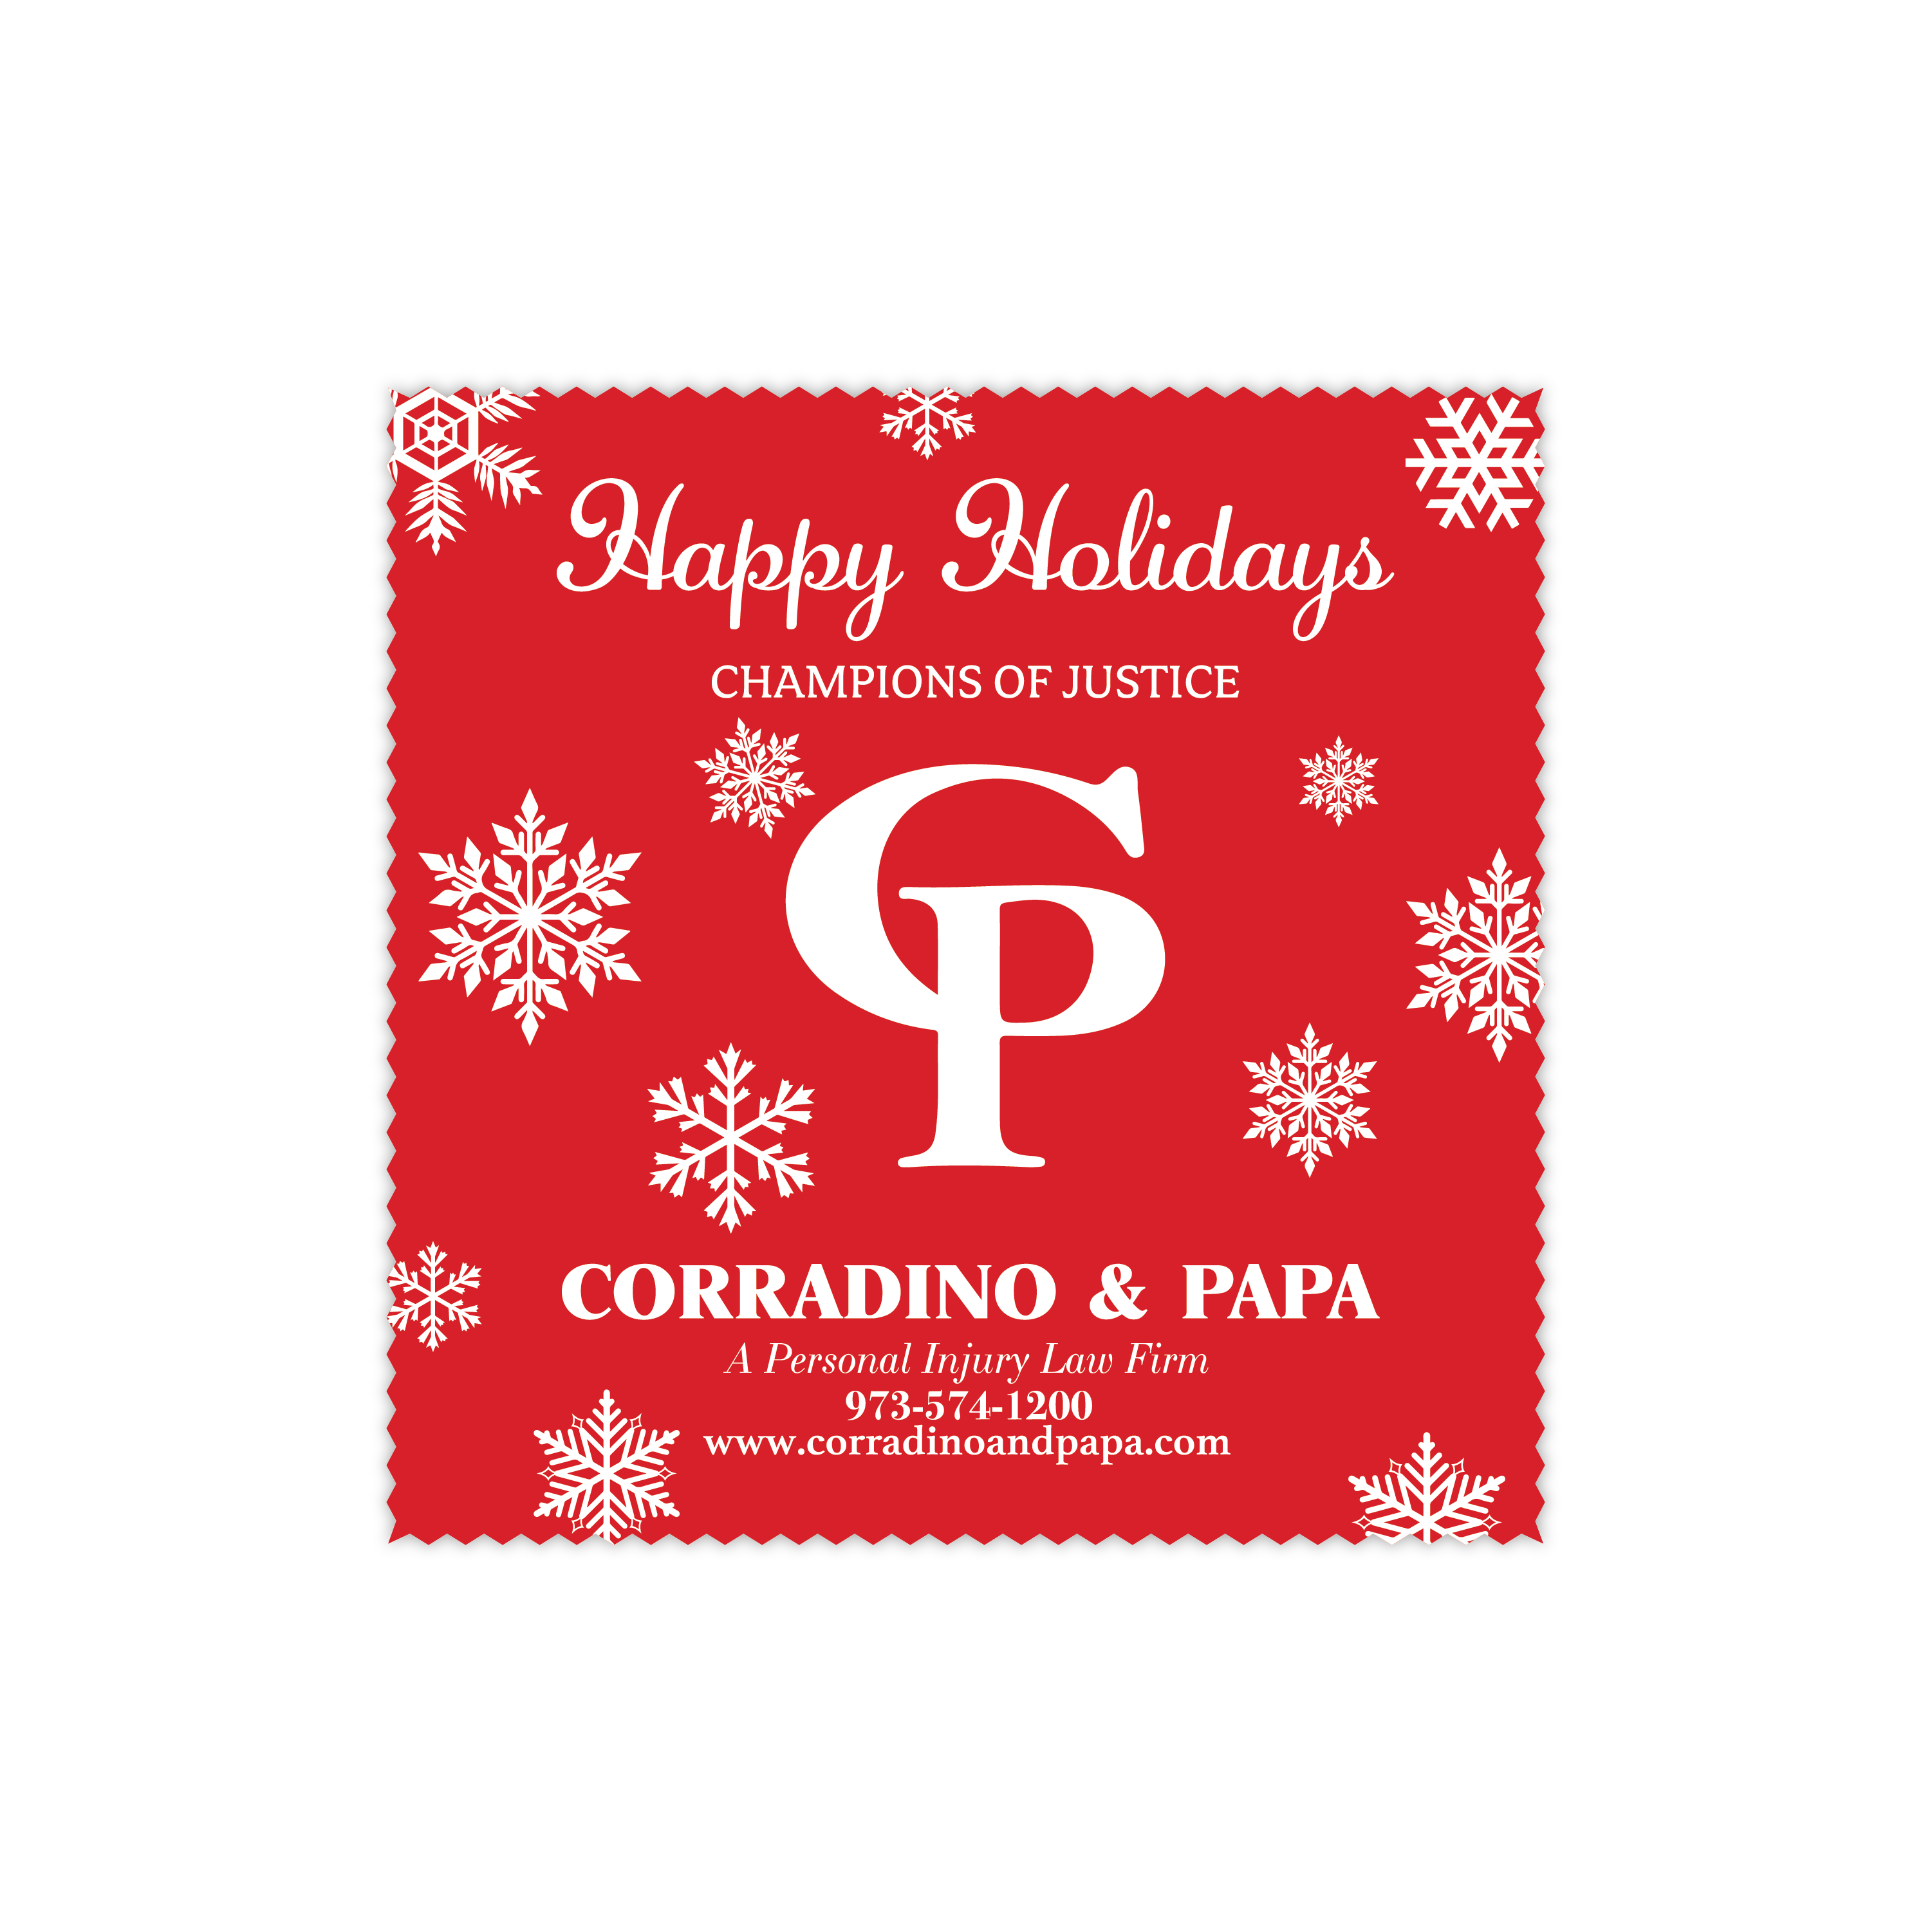 Corradino & Papa Law Firm Holiday Giveaway Cloth